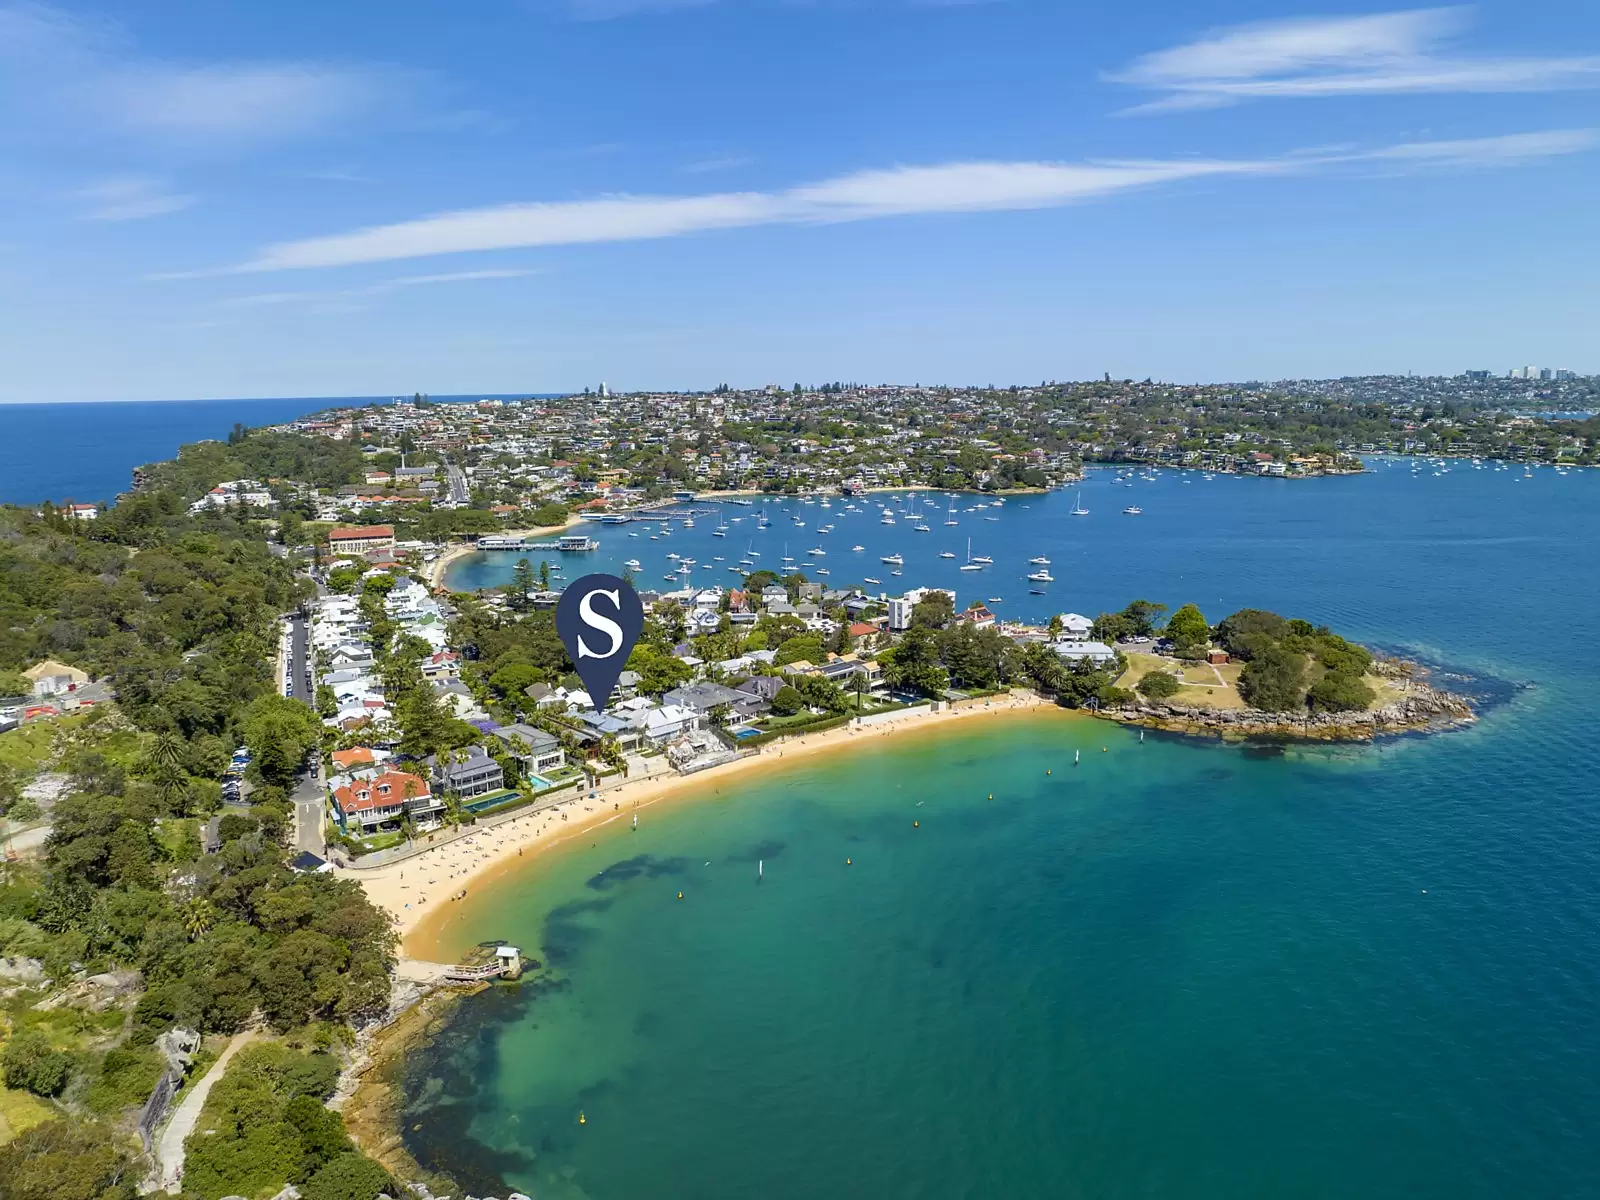 Photo #21: 13 Victoria Street, Watsons Bay - Sold by Sydney Sotheby's International Realty